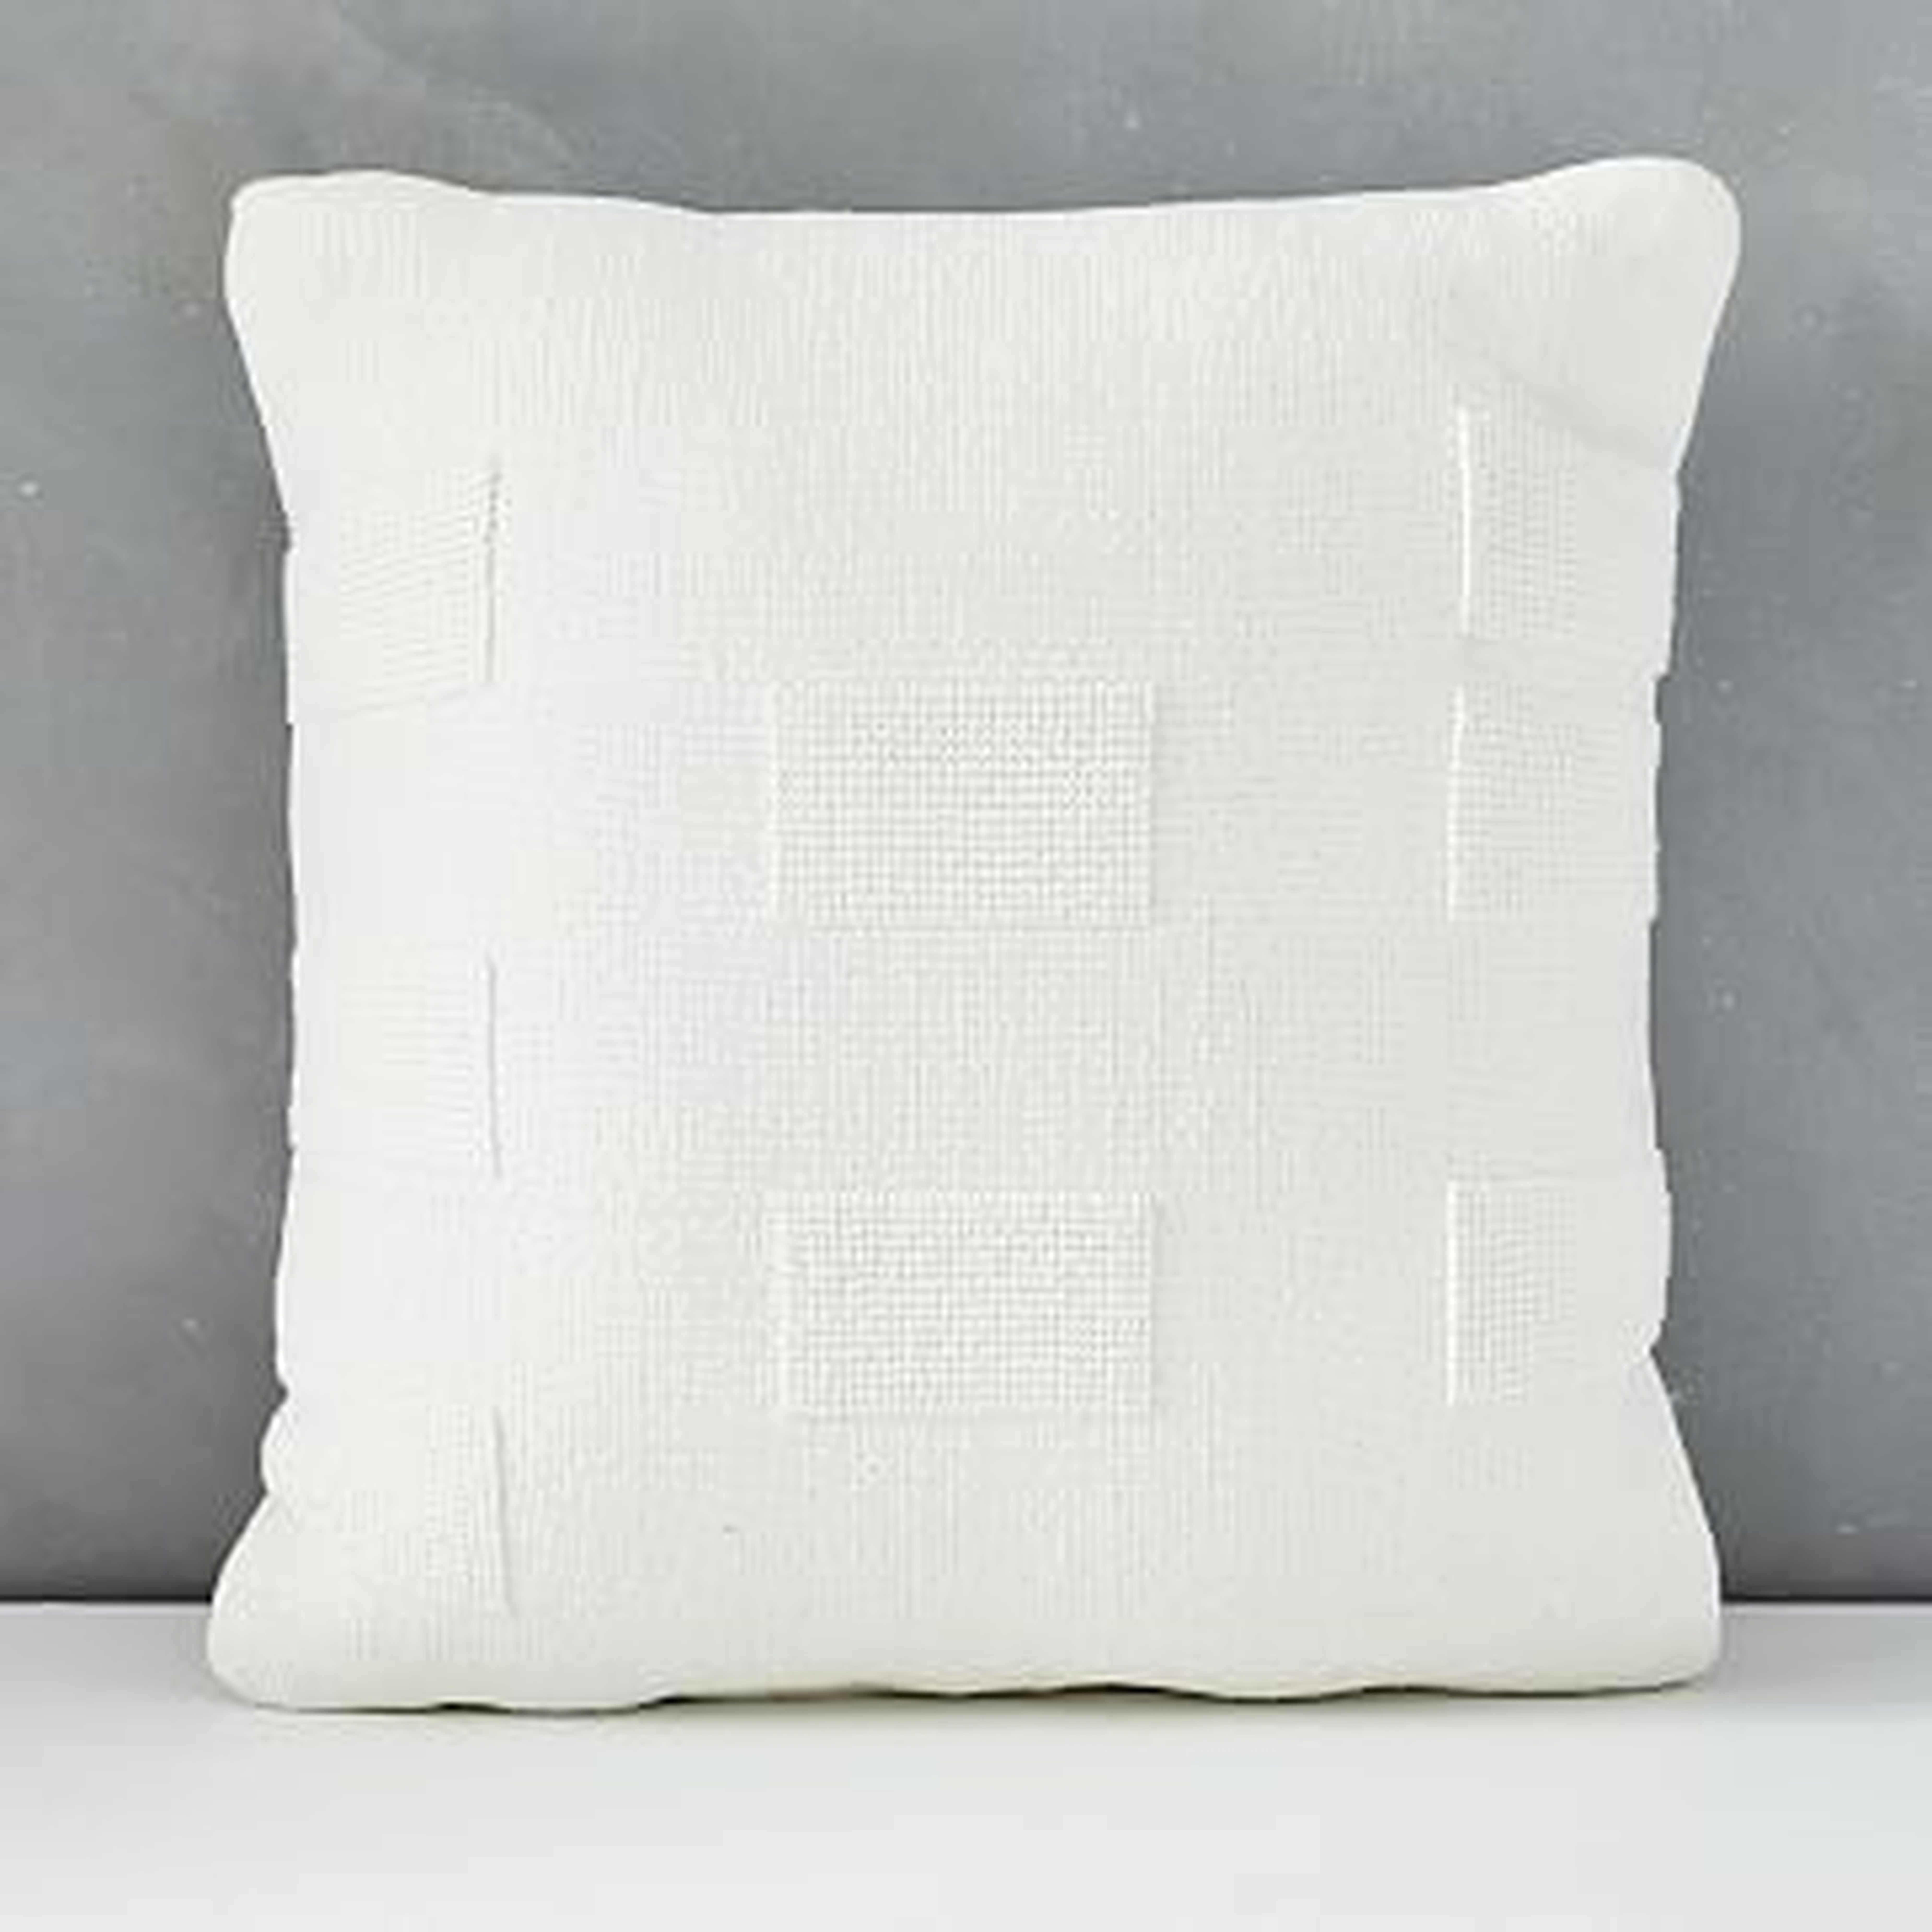 Outdoor Tufted Pillow, Set of 2, Stone White, 20"x20" - West Elm